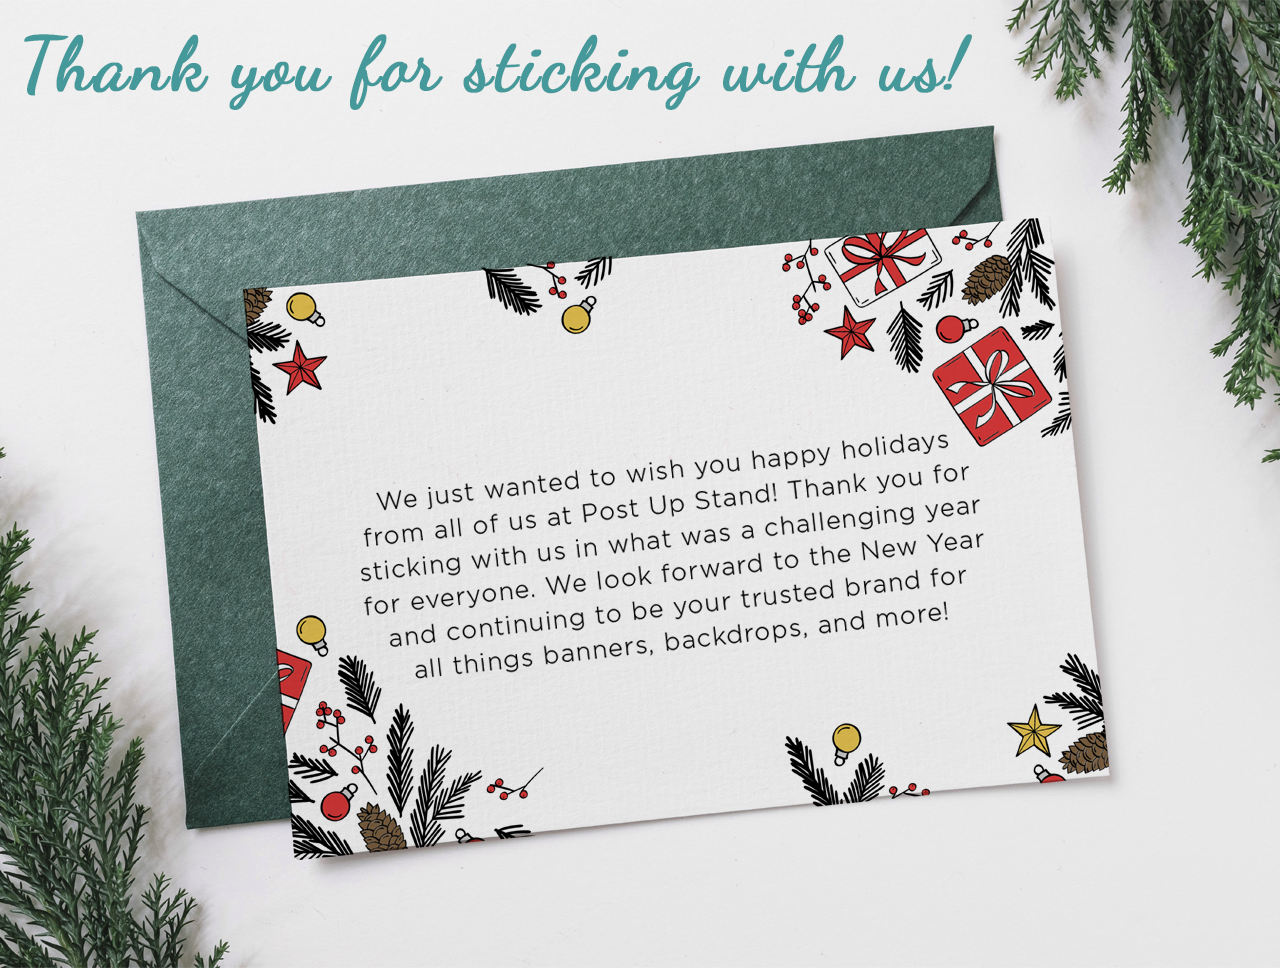 Season's greetings from all of us at Post Up Stand!